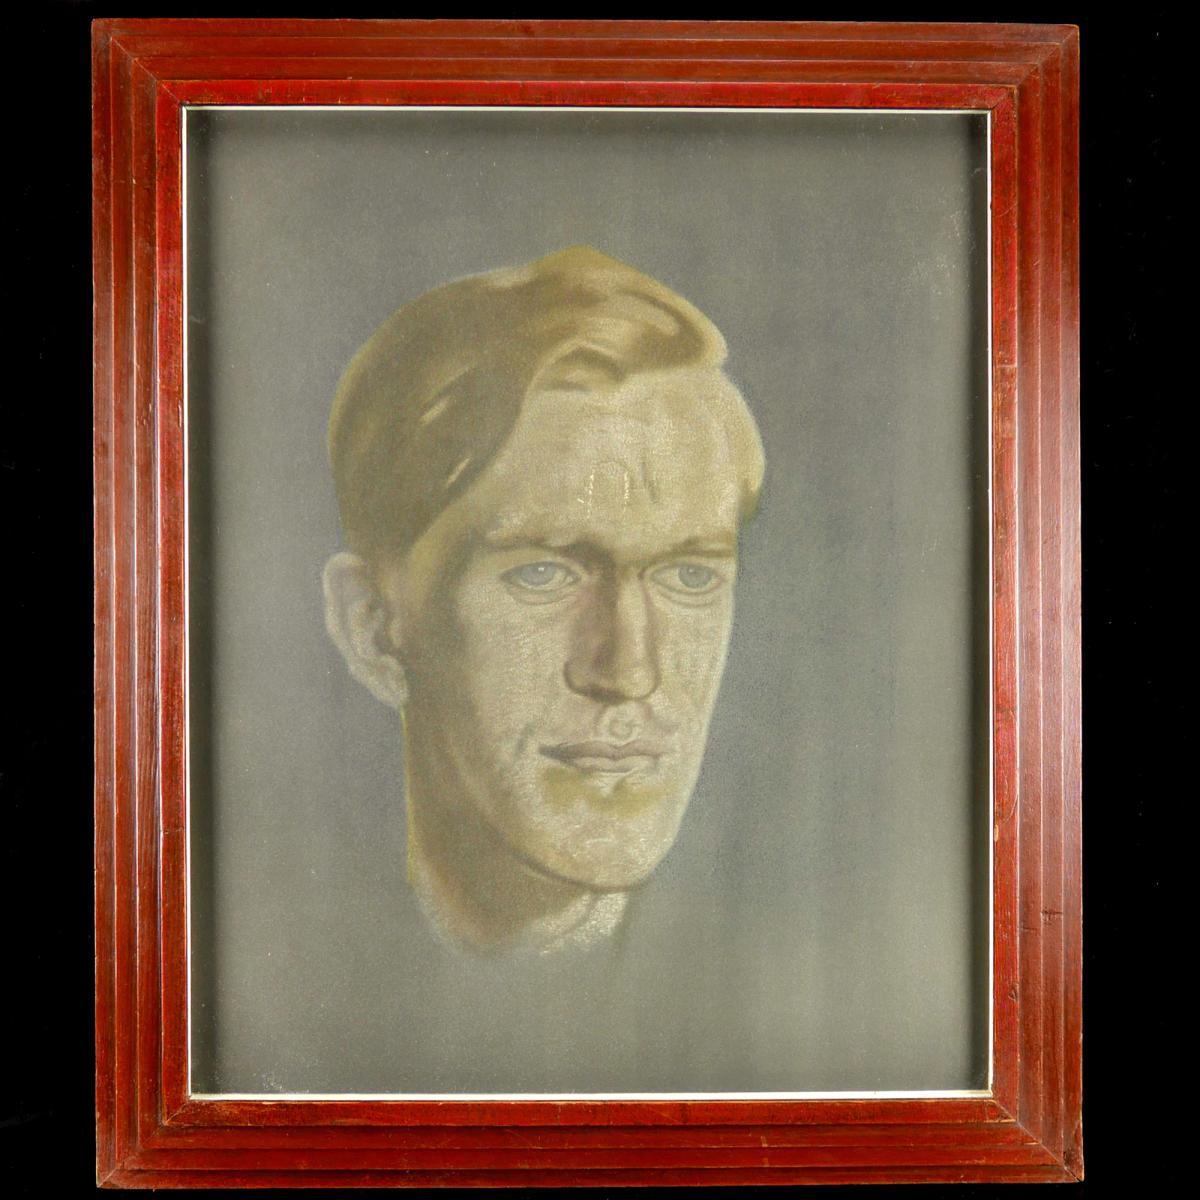 Lawrence of Arabia – The Ghost Portrait, 1935